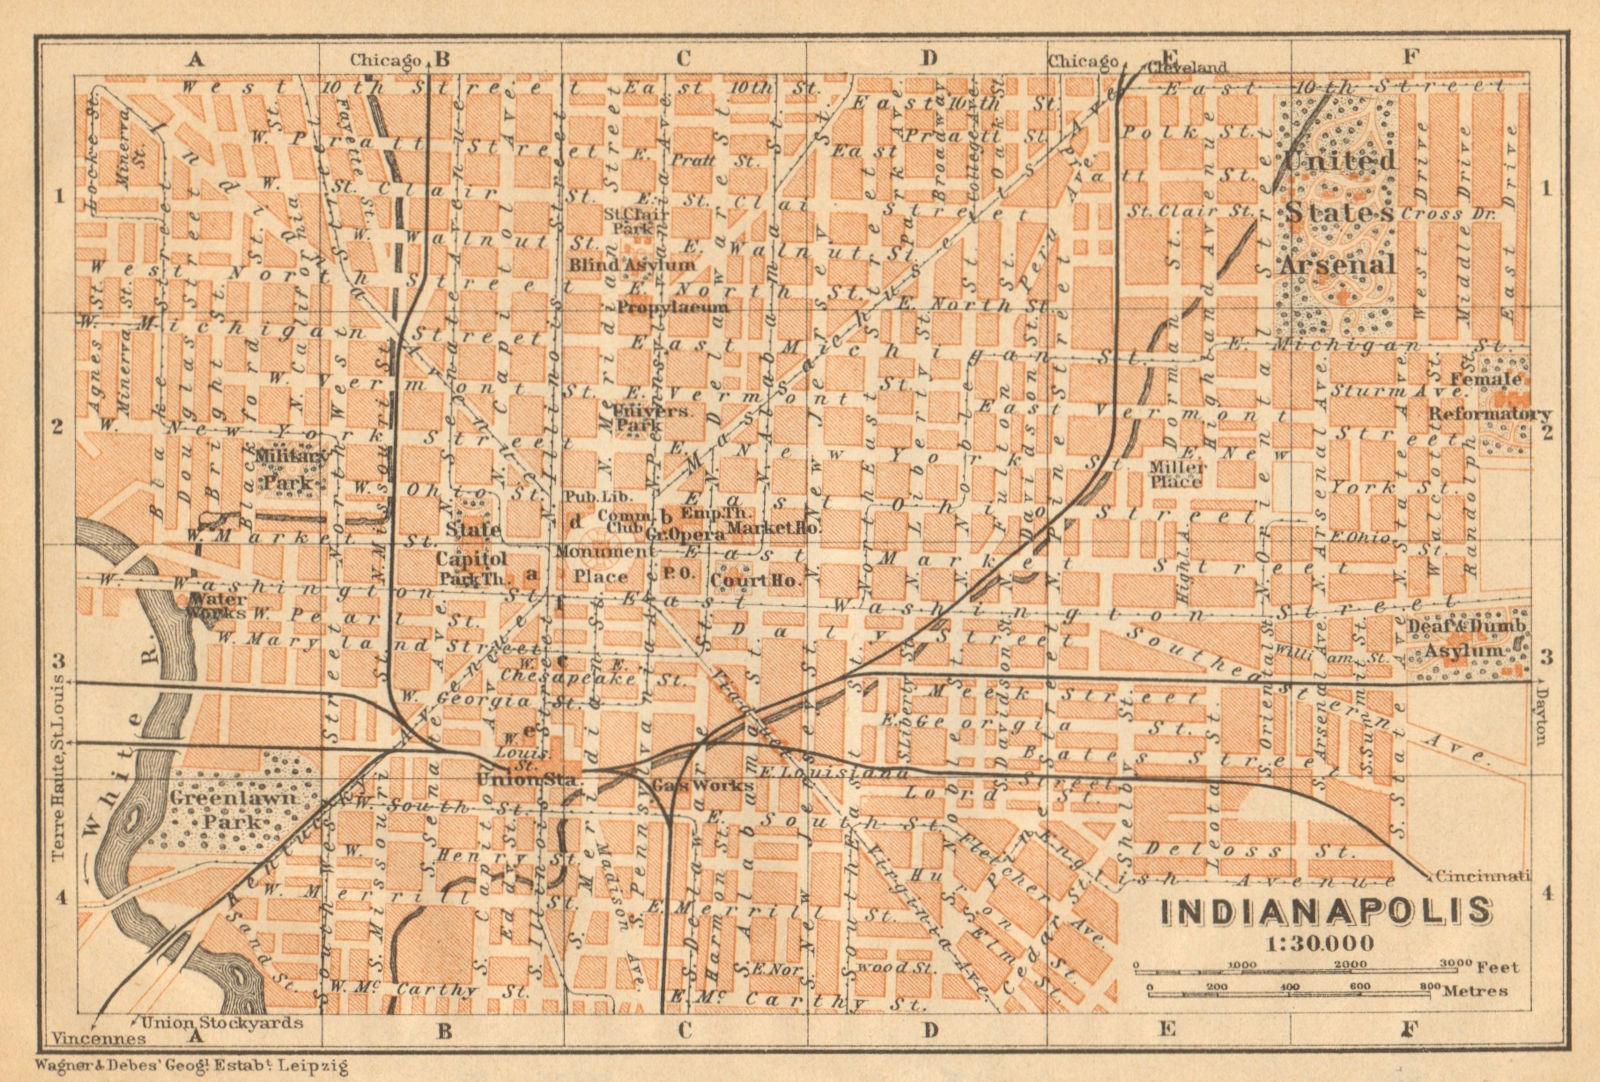 INDIANAPOLIS antique town city plan. Indiana. BAEDEKER 1904 old map